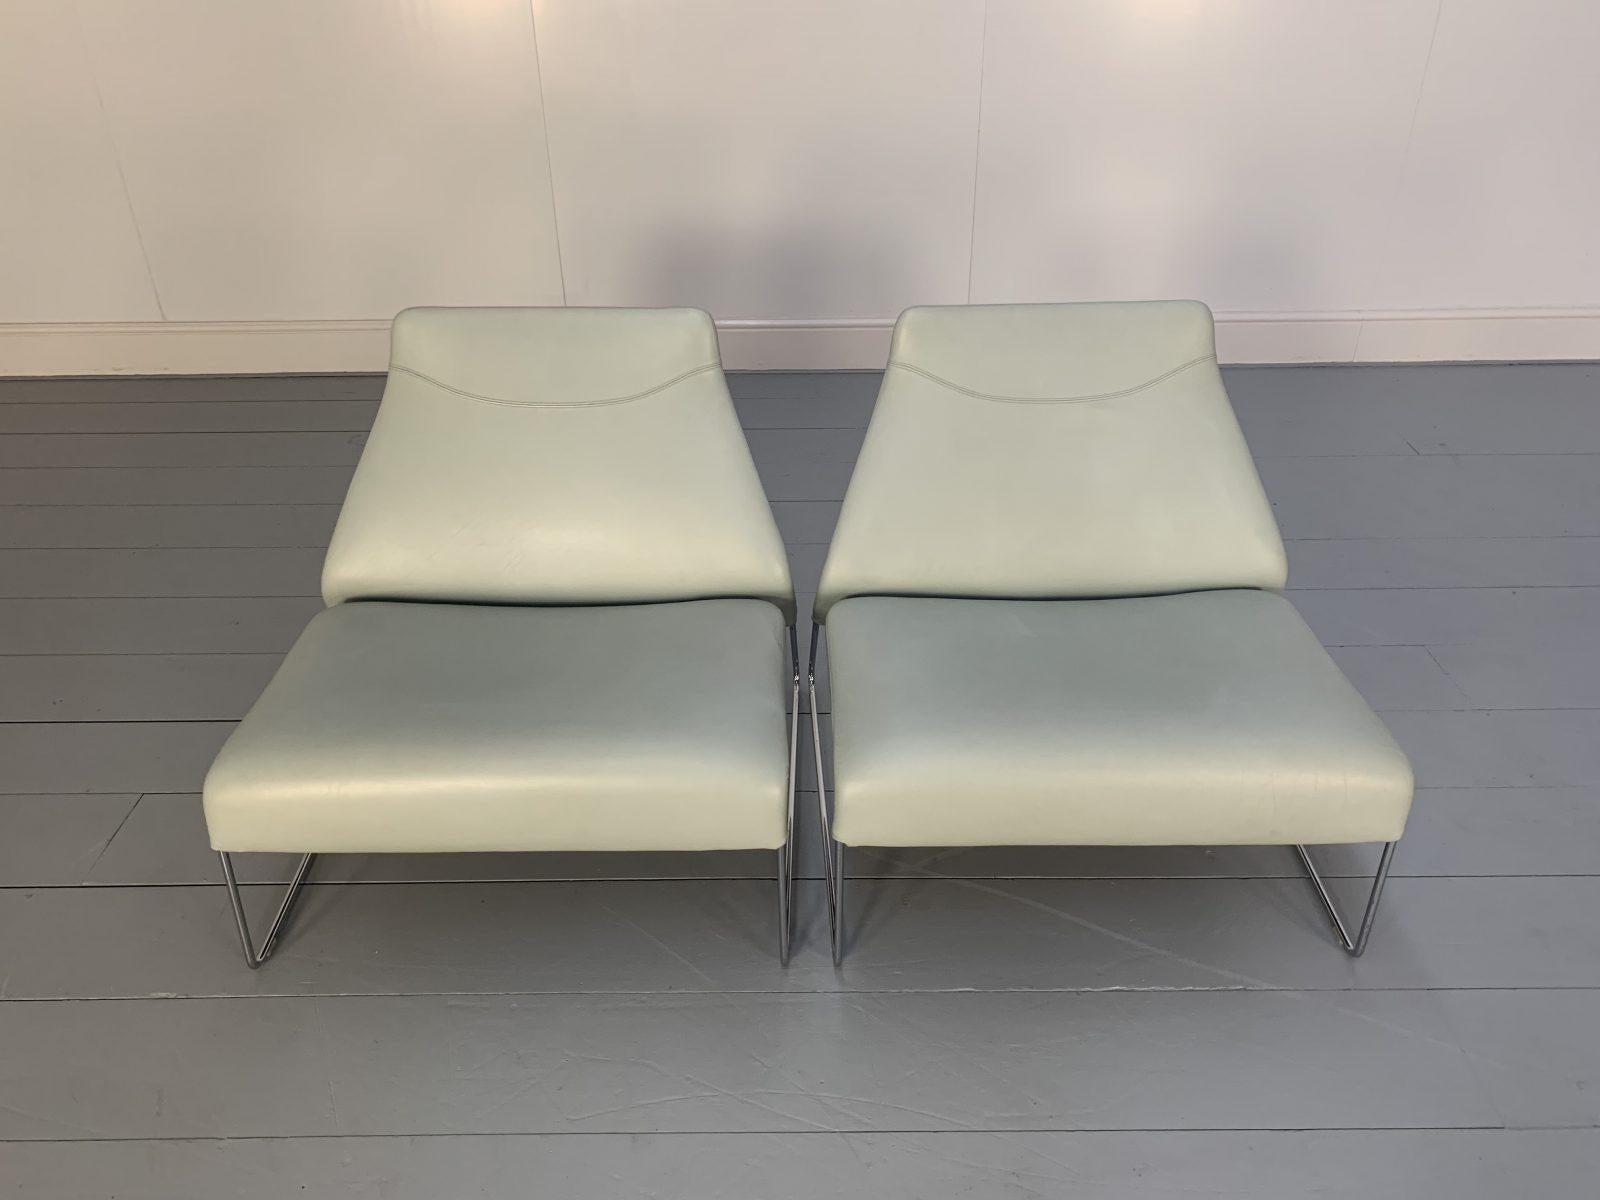 Pair of B&B Italia “Lazy “05” Armchairs in Pale Grey Blue “Gamma” Leather For Sale 1